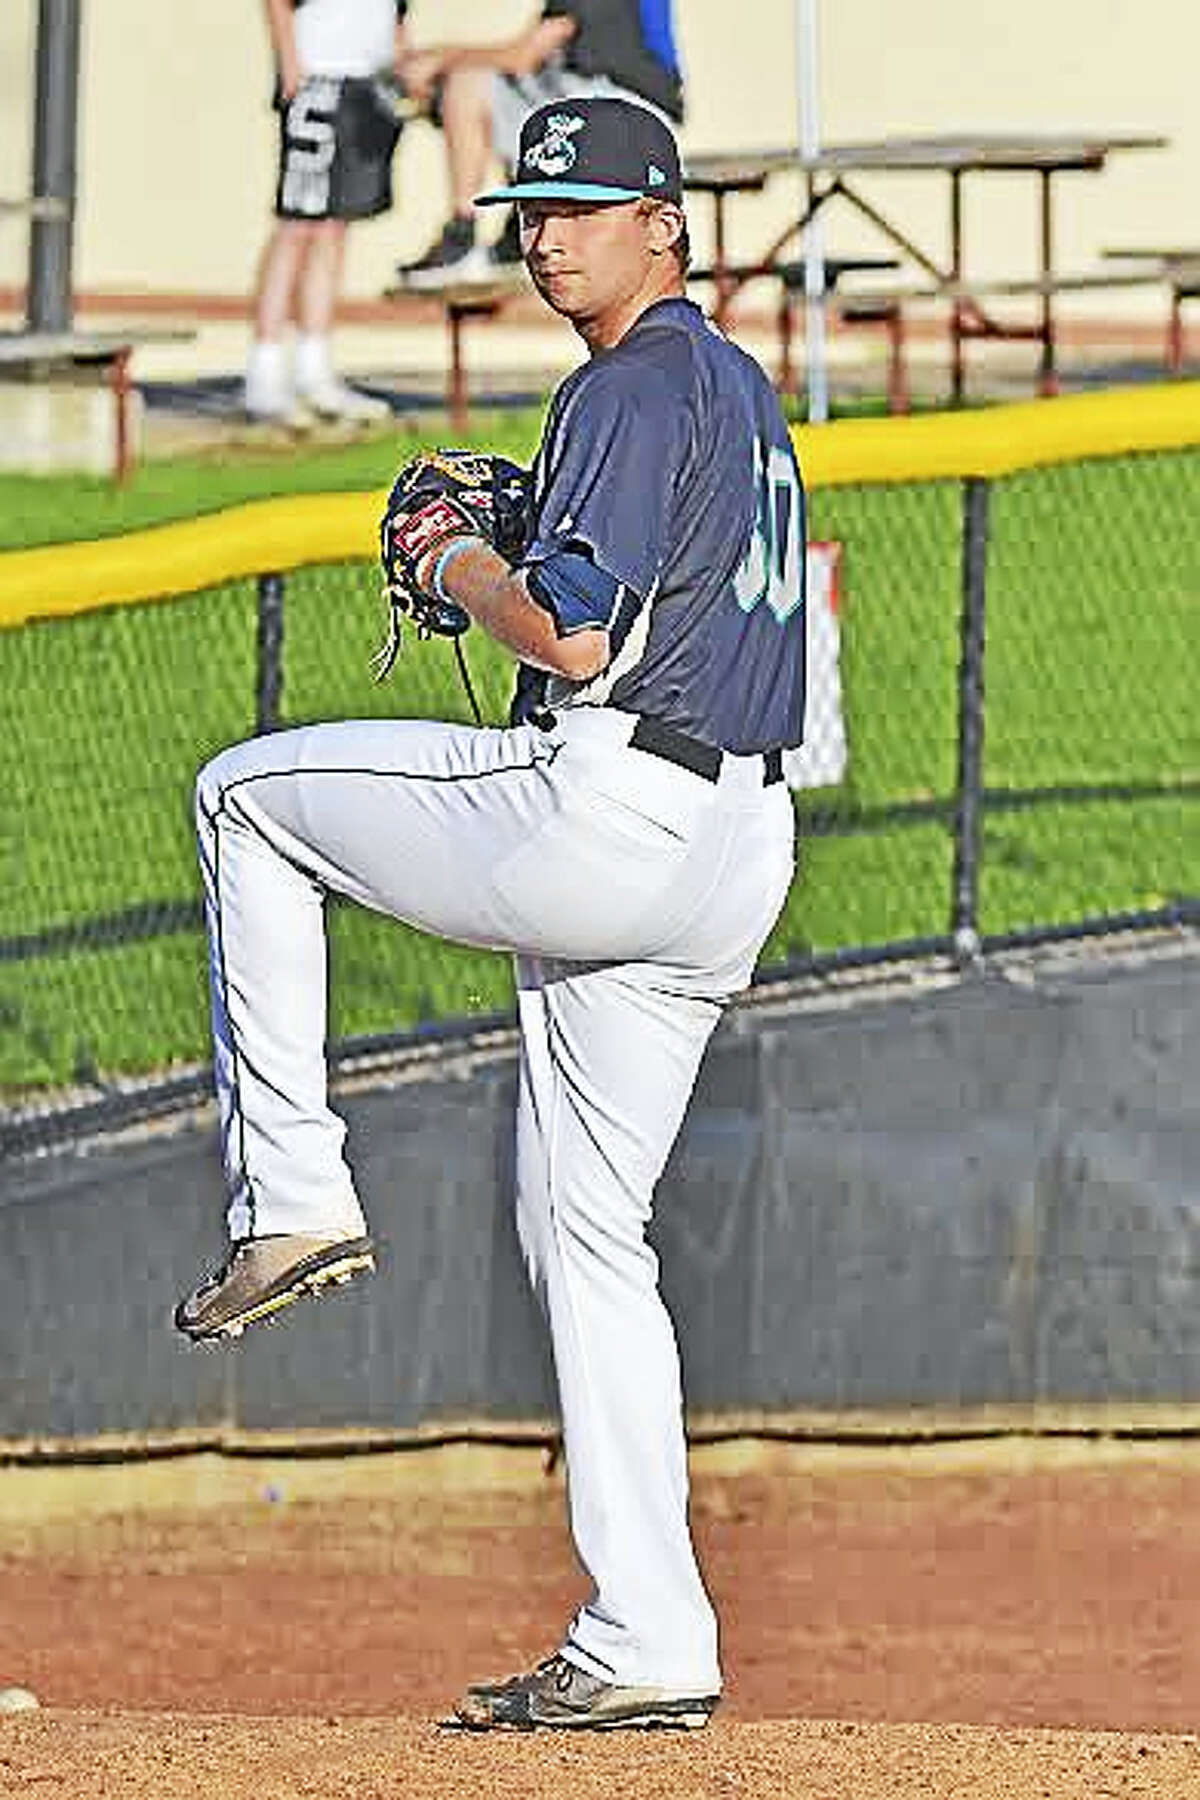 Newtown’s Kyle Wilcox is having a successful season as a versatile reliever for Clinton LumberKings, a Class A affiliate of the Seattle Mariners.